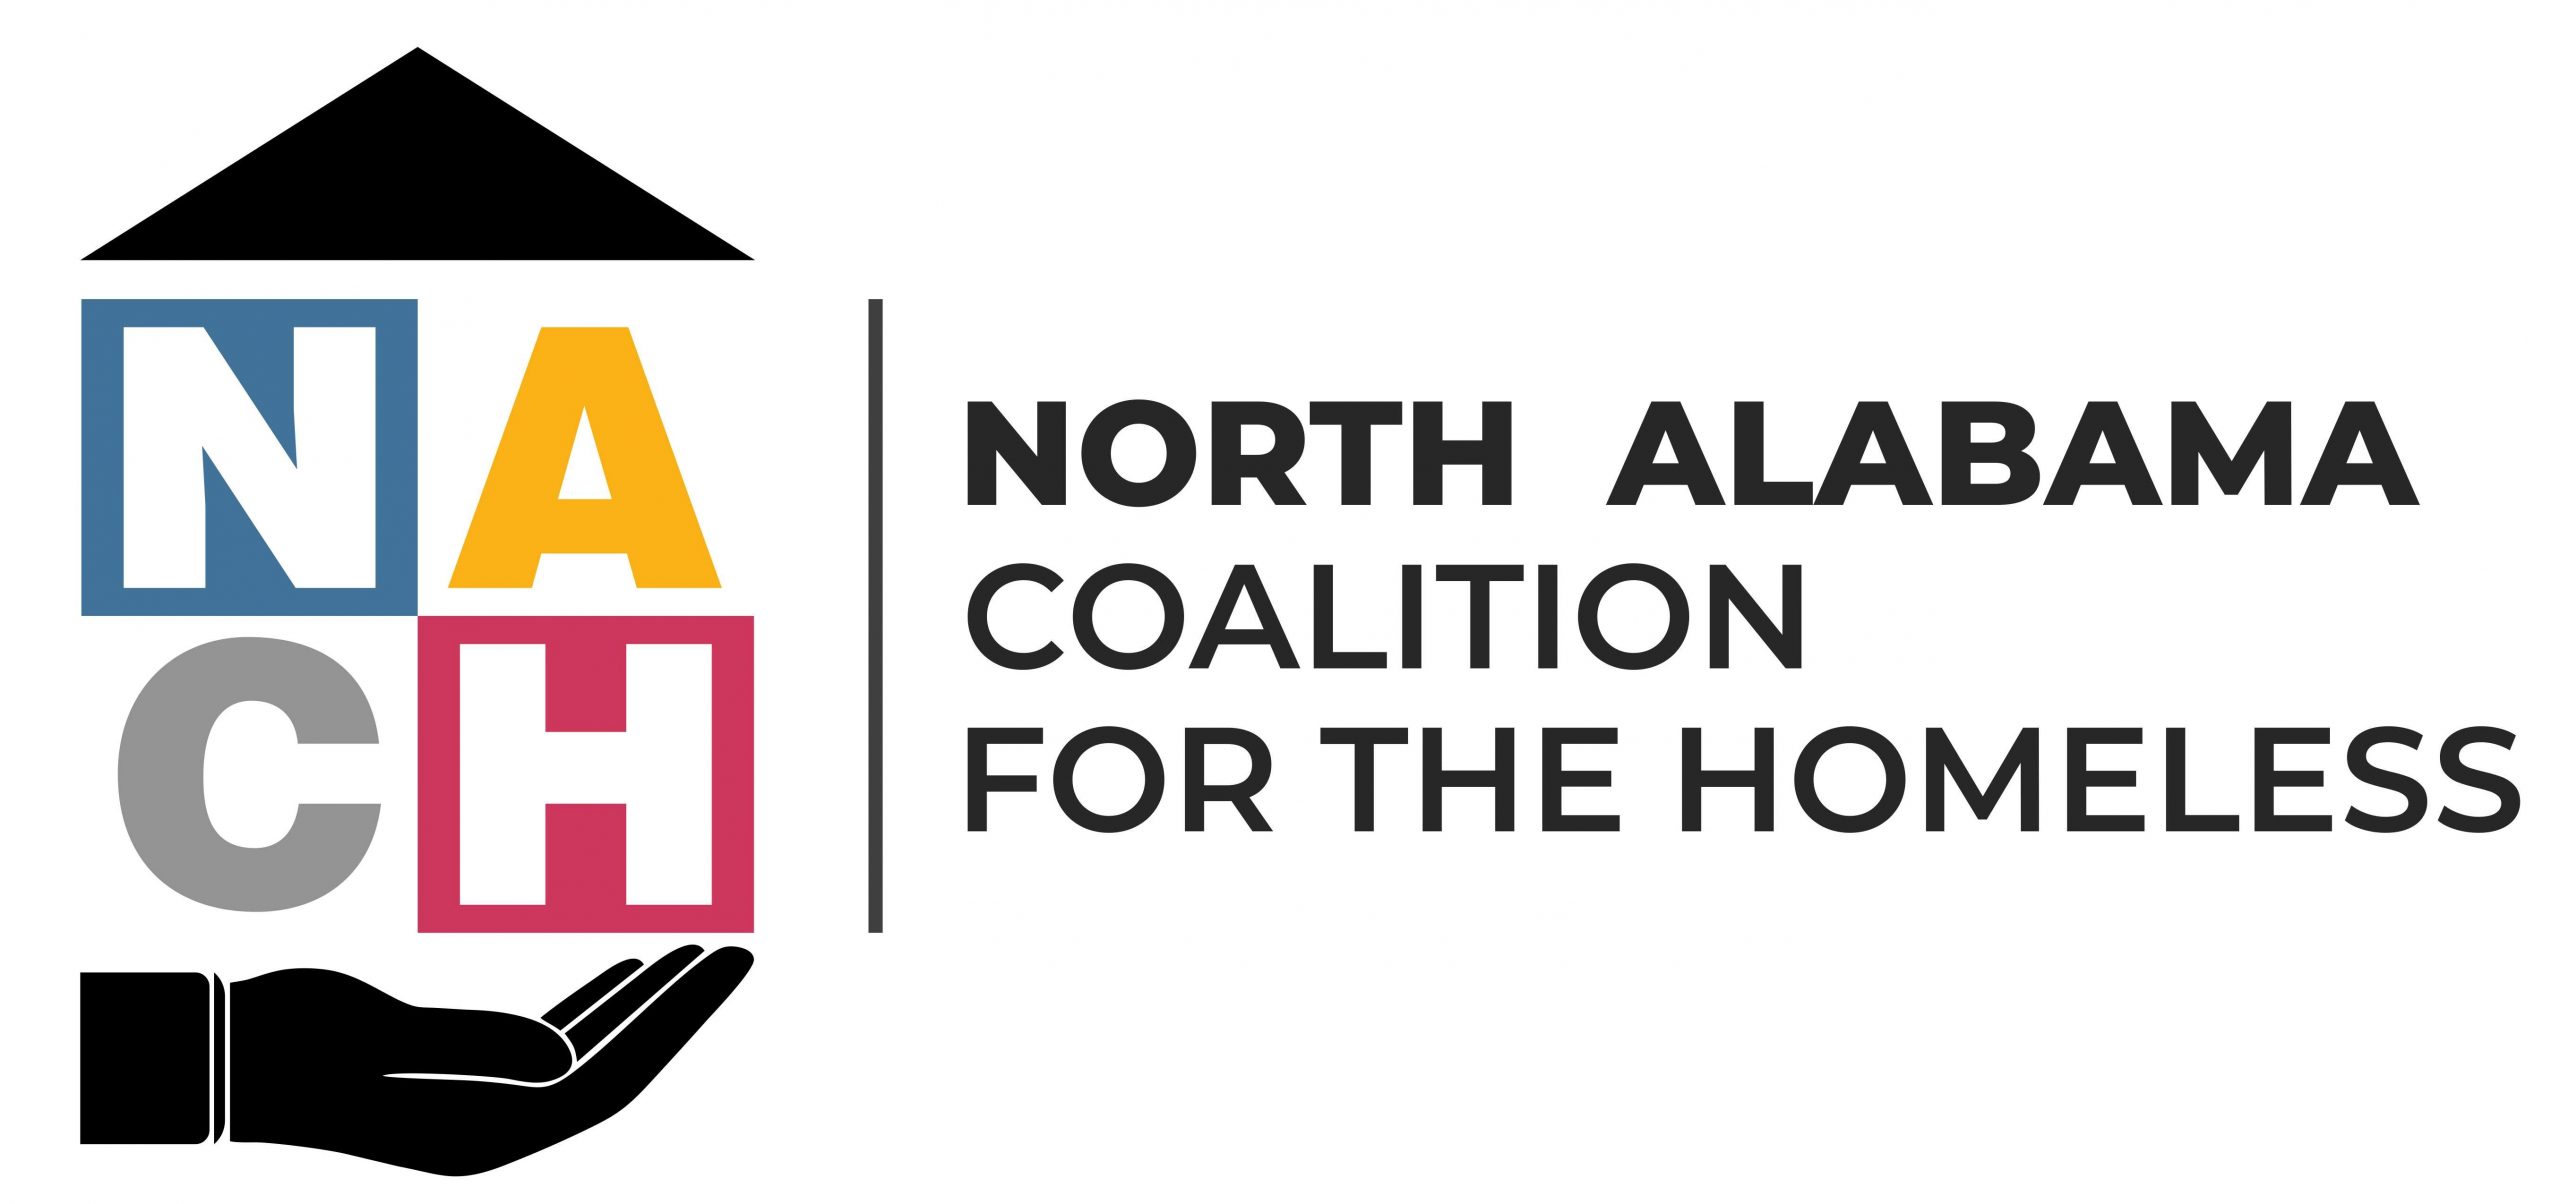 North Alabama Coalition for the Homeless